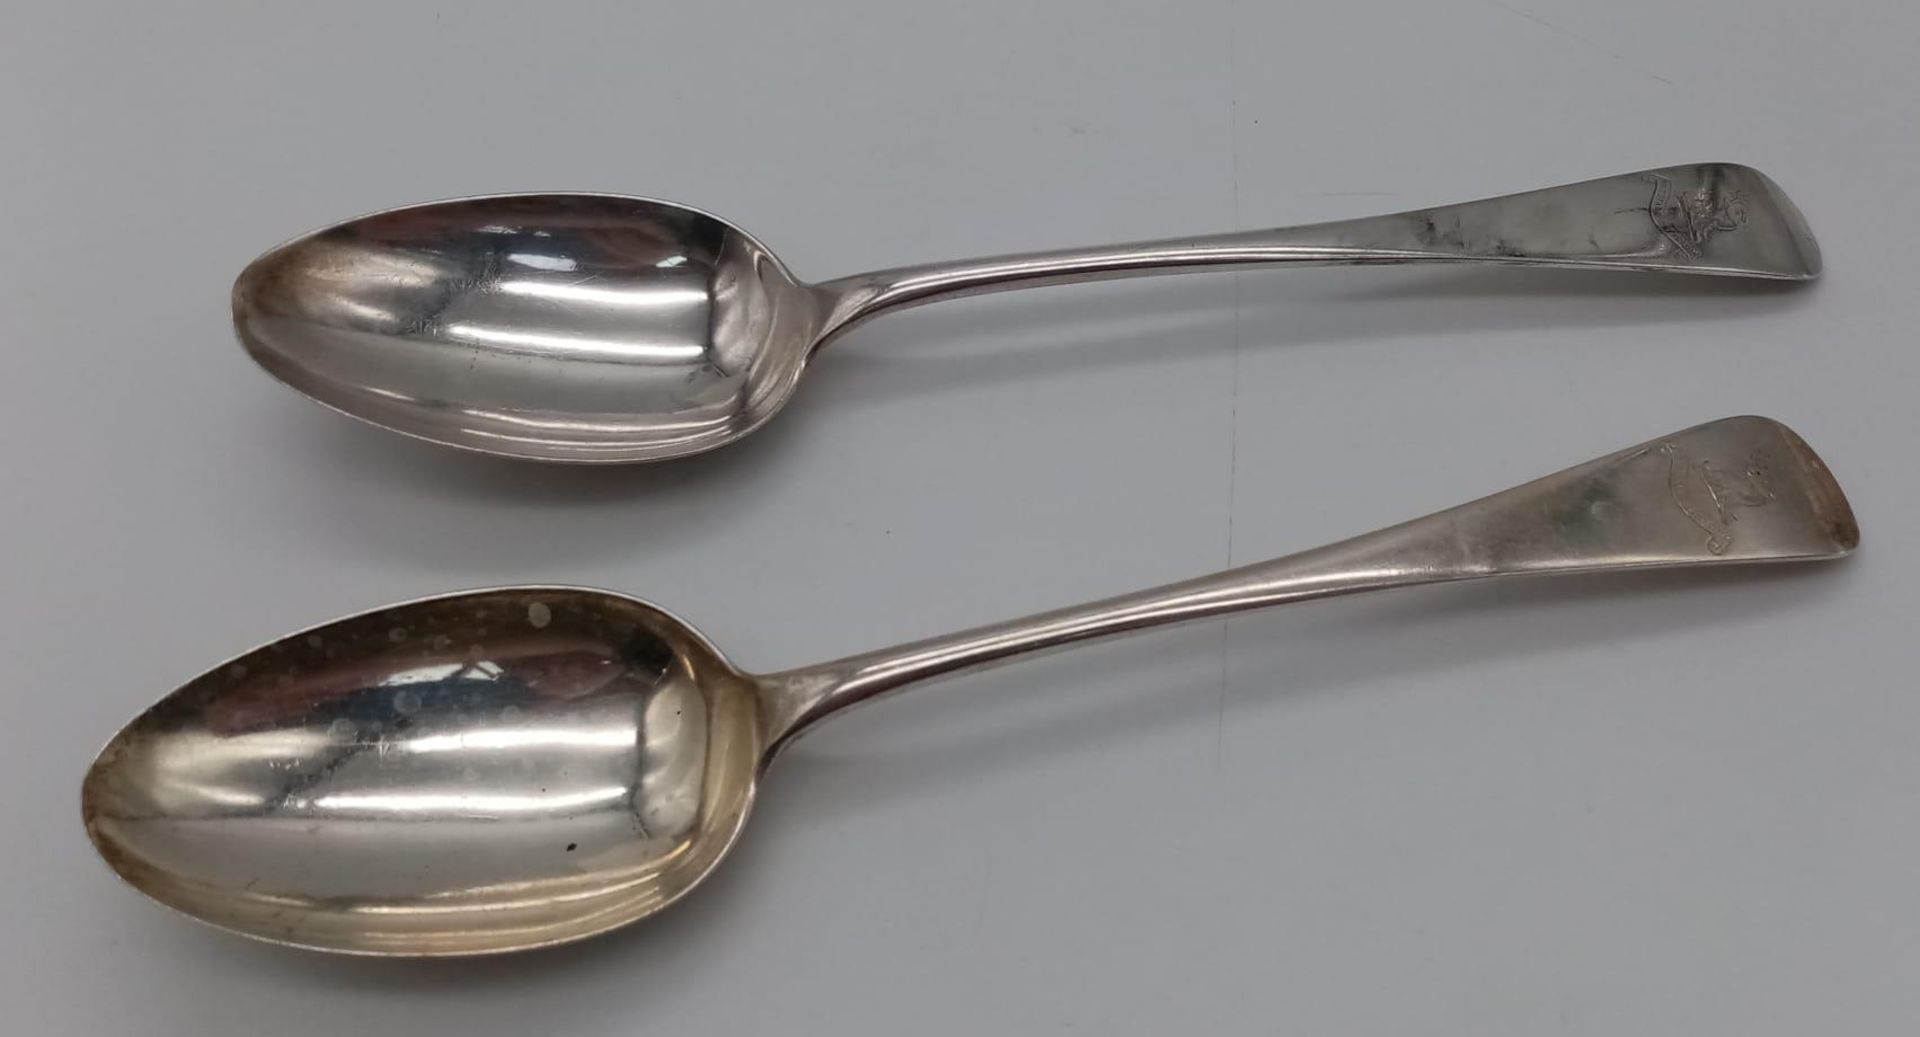 Two Large Sterling Silver Victorian Serving Spoons. Hallmarks for London 1879. Makers mark of Thomas